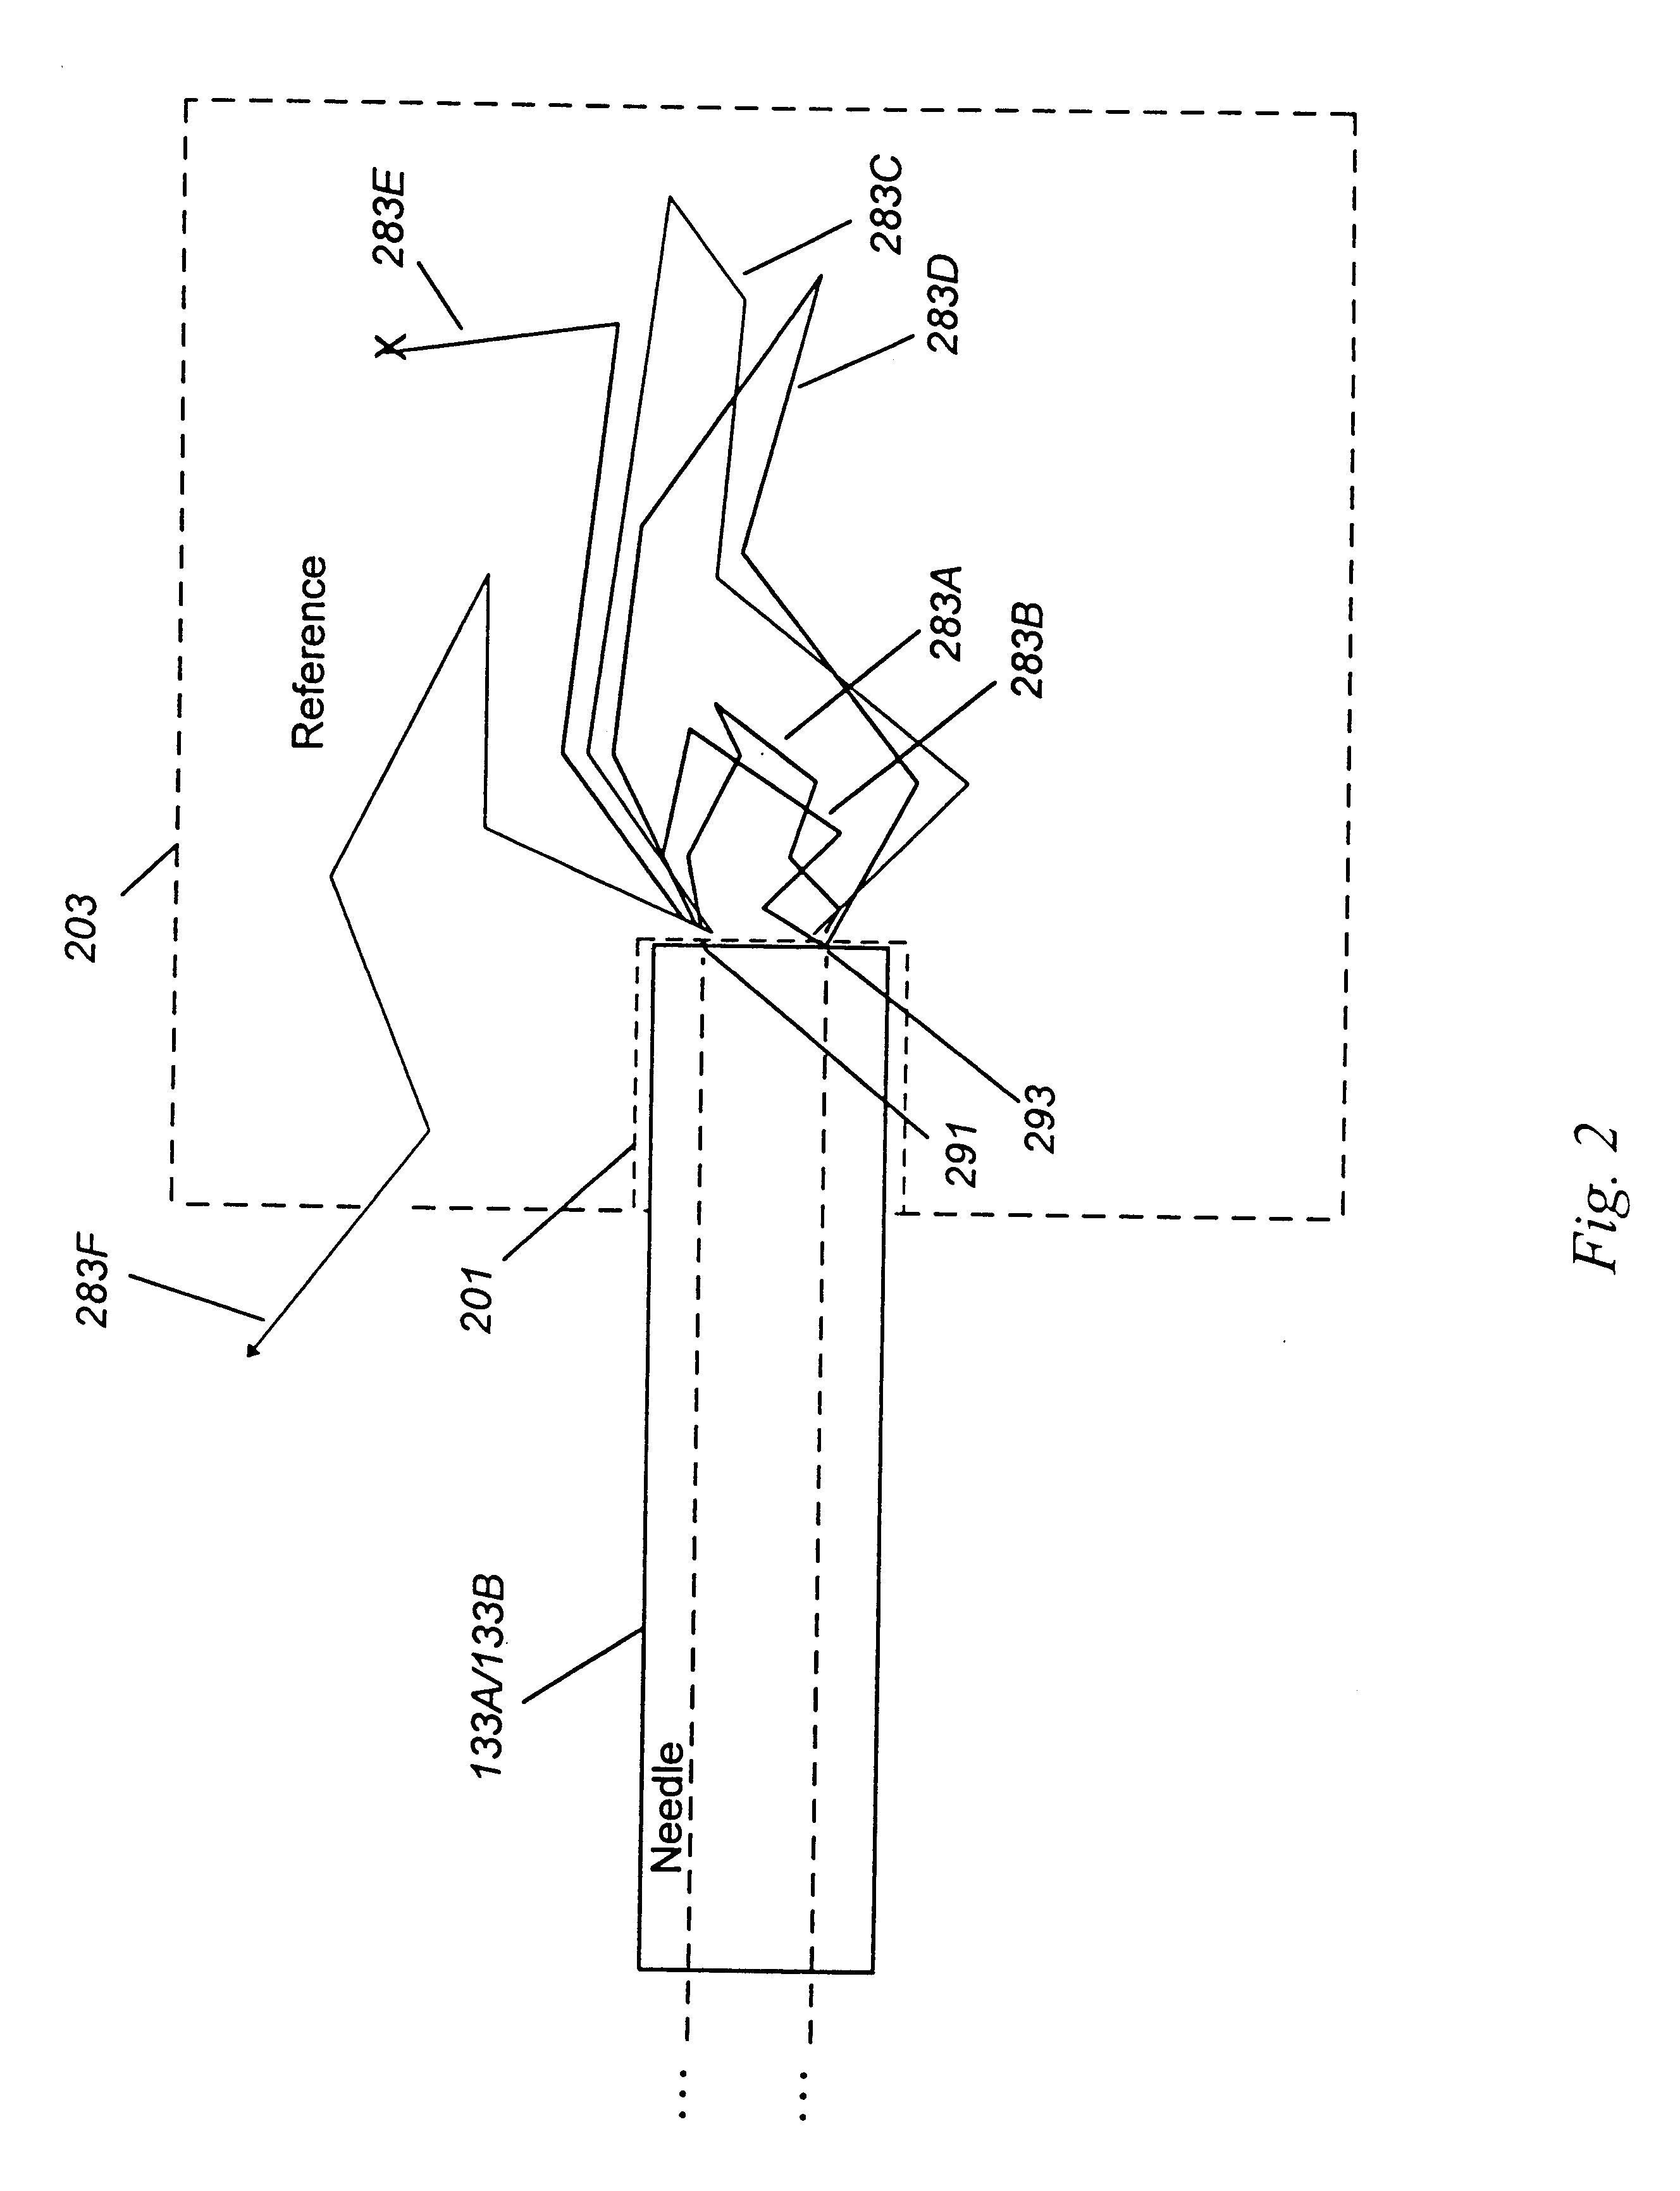 Detecting, localizing, and targeting internal sites in vivo using optical contrast agents